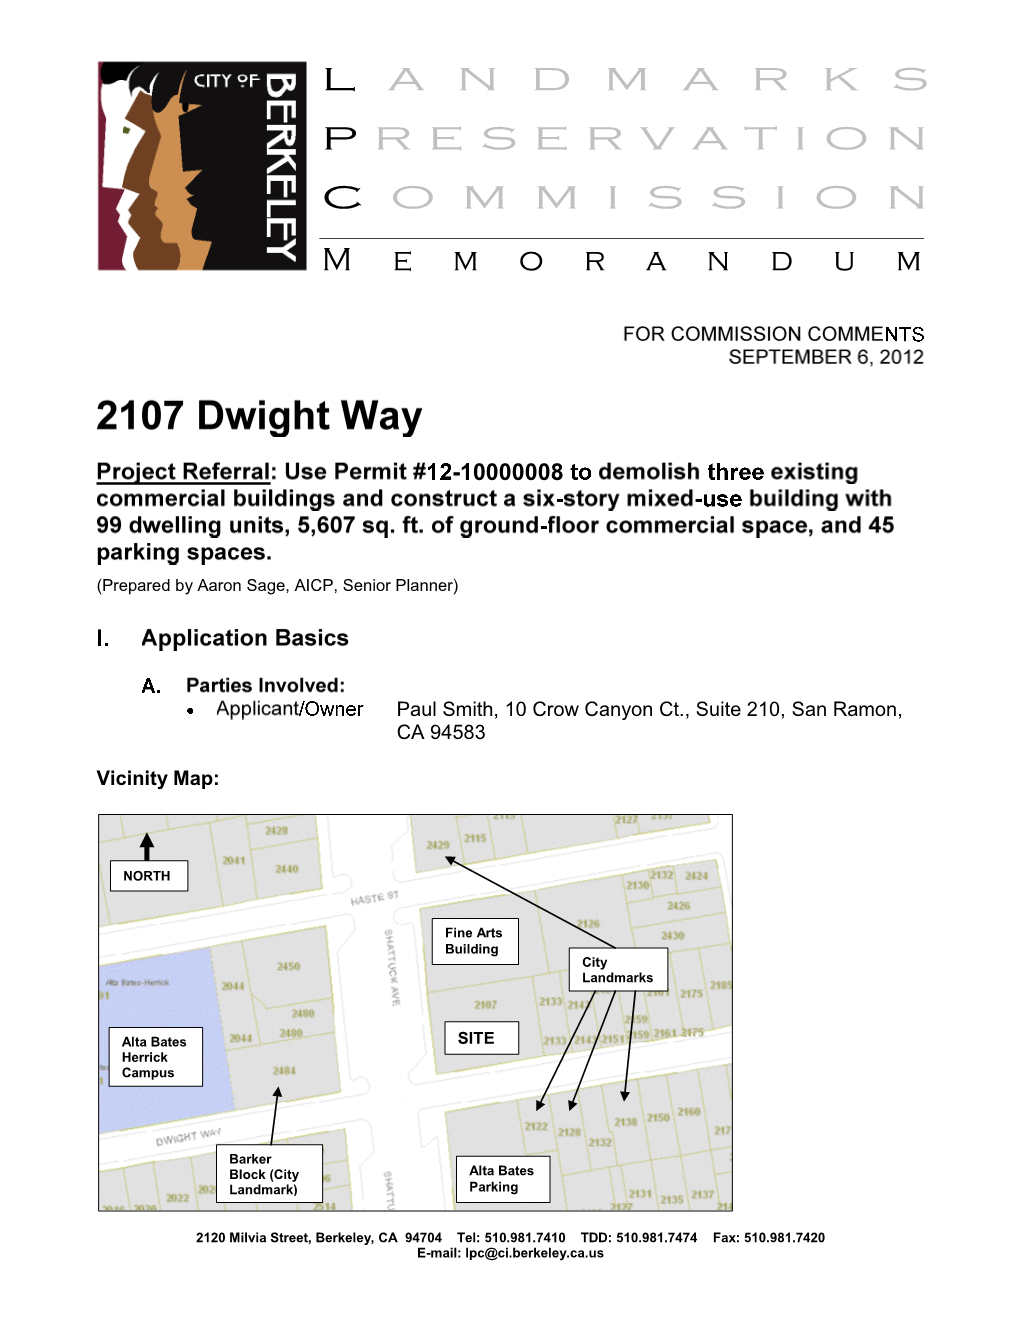 2107 DWIGHT WAY LANDMARKS PRESERVATION COMMISSION Page 2 of 2 September 6, 2012